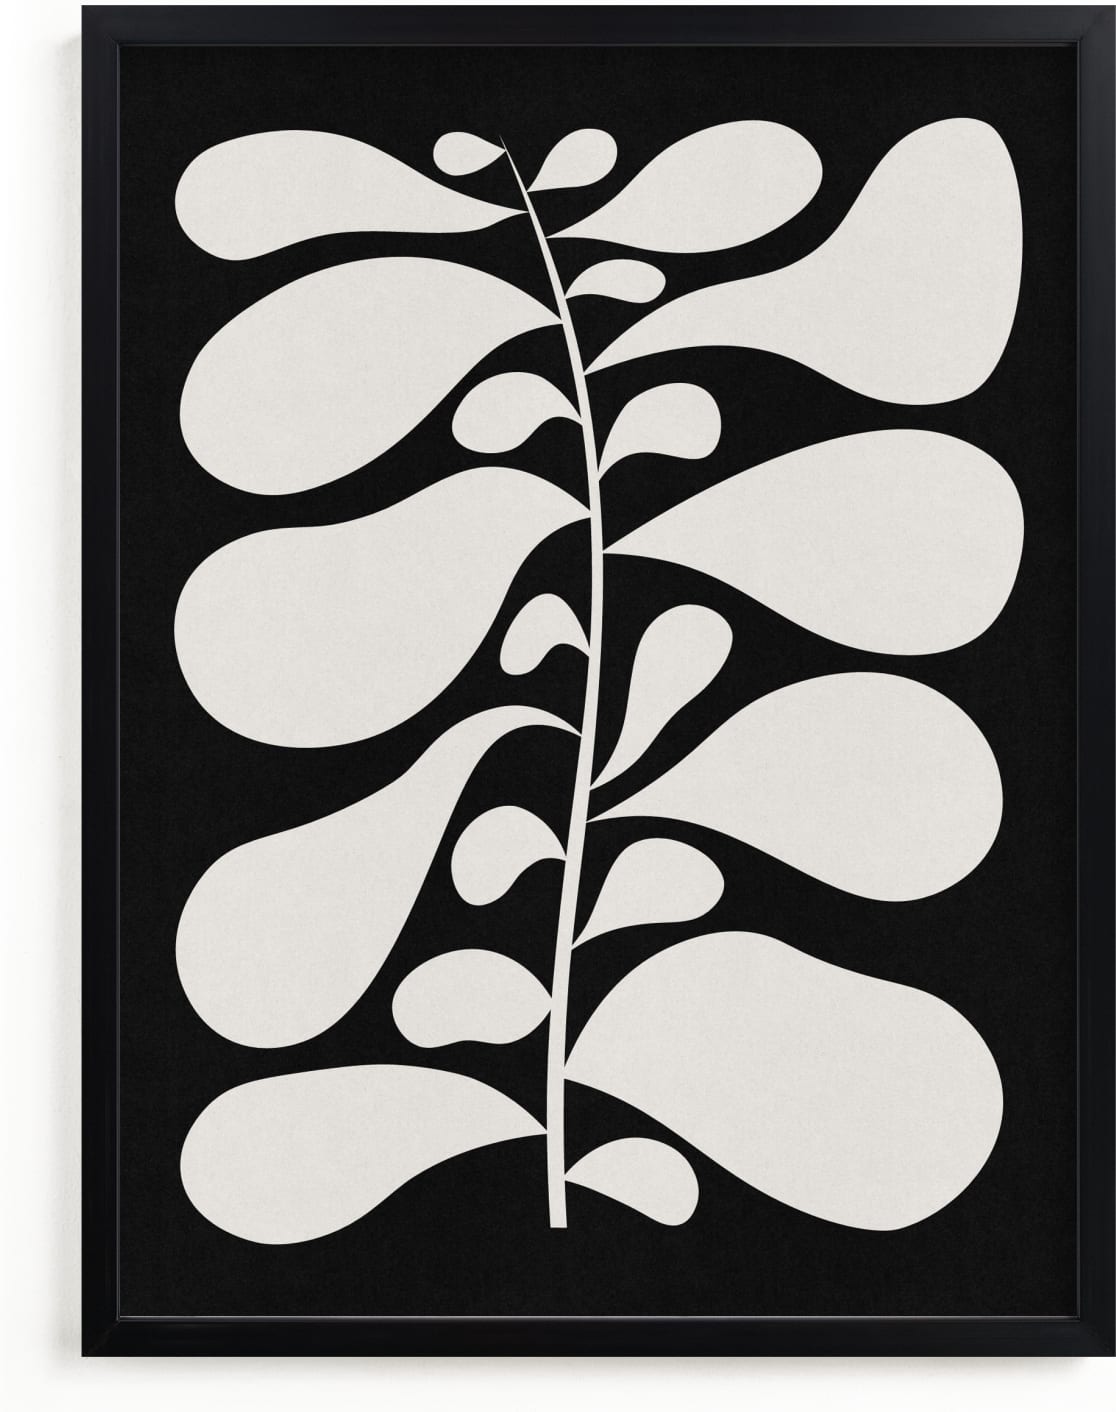 This is a black and white art by Alisa Galitsyna called Black Plant II.